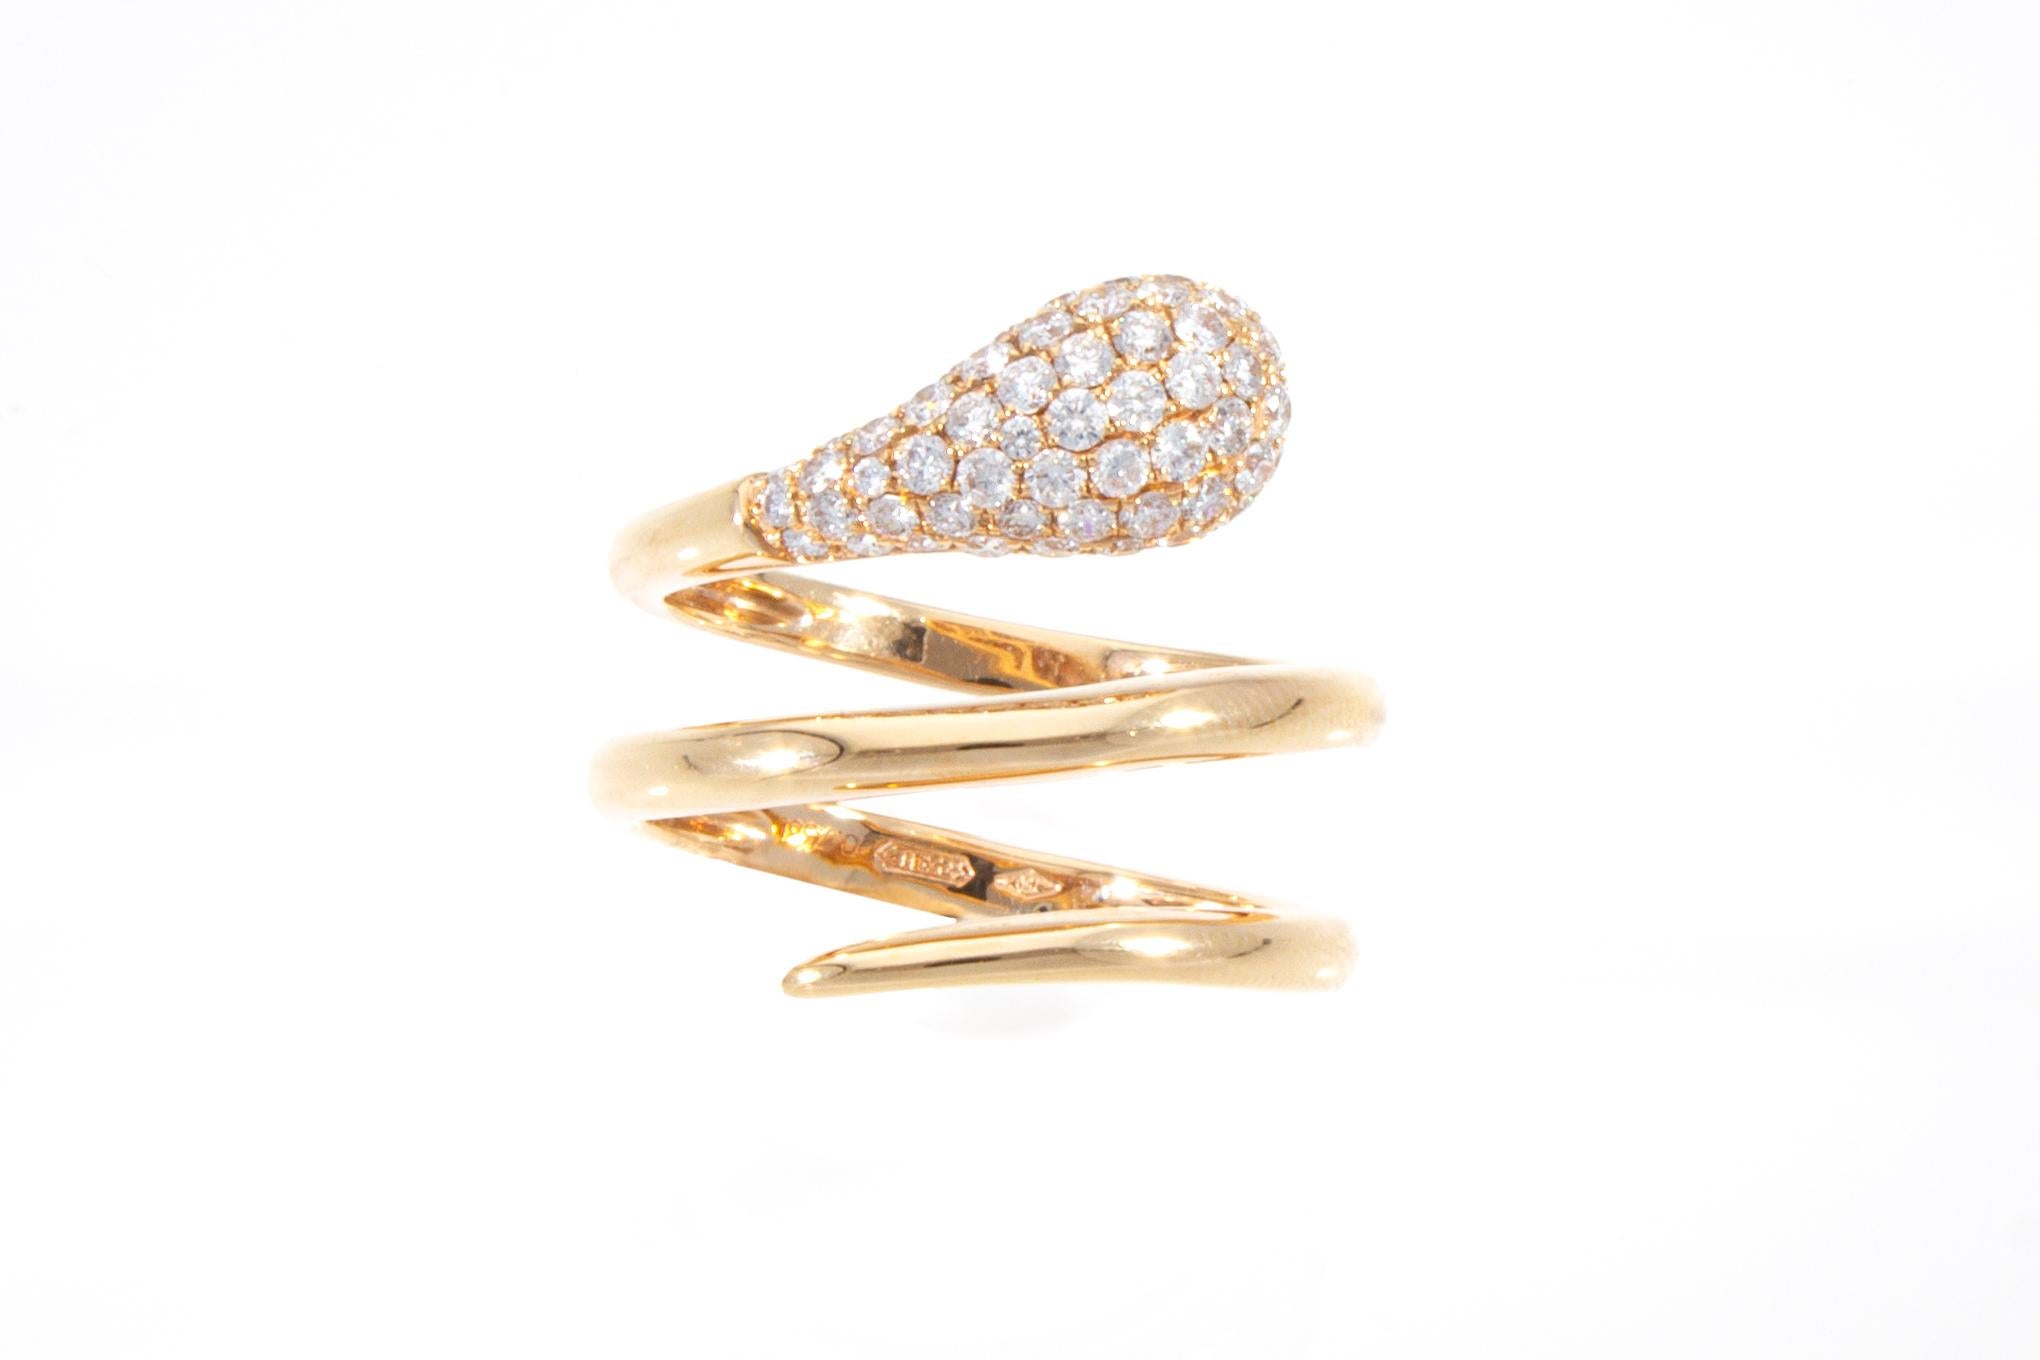 Ring with 0.73 Ct of Diamonds, 18Kt Gold Snake Model For Sale 4